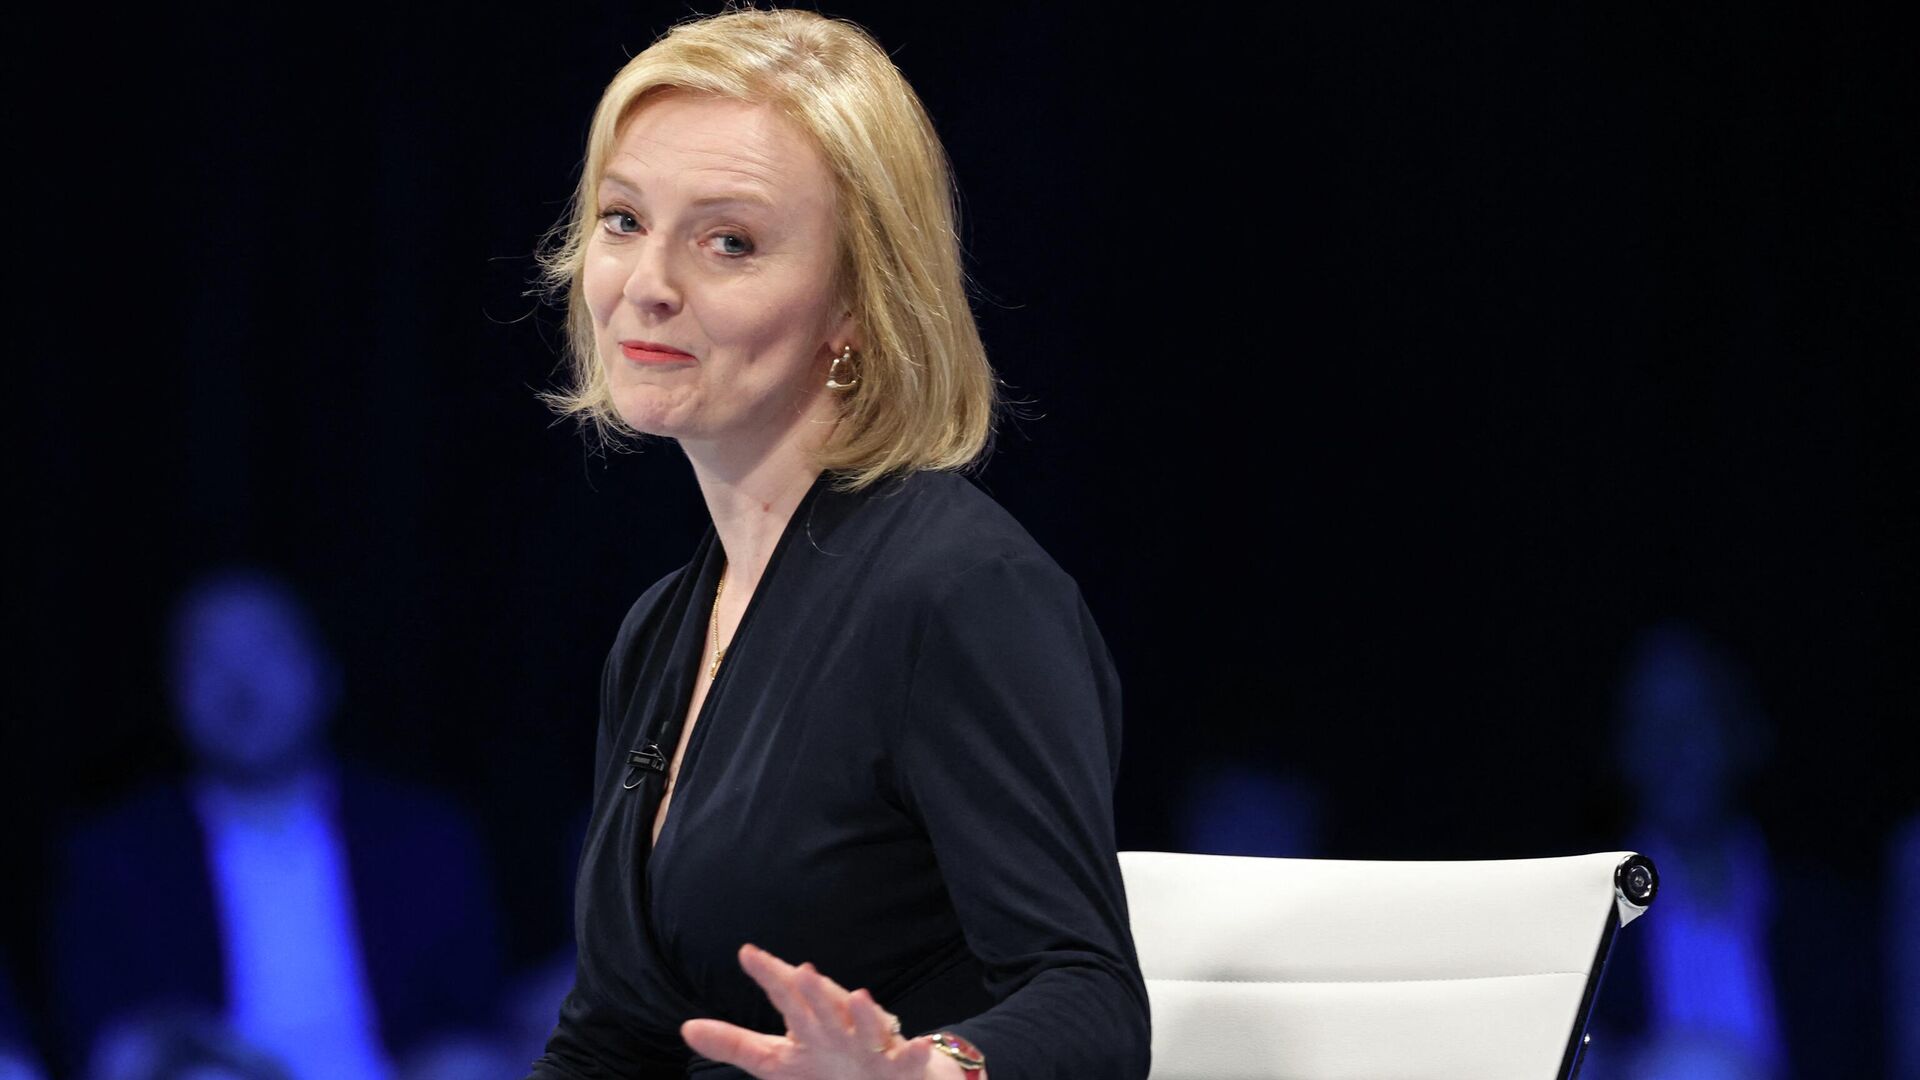 Contender to become the country's next Prime minister and leader of the Conservative party British Foreign Secretary Liz Truss answers questions as she takes part in a Conservative Party Hustings event in Leeds, on July 28, 2022 - Sputnik International, 1920, 04.08.2022